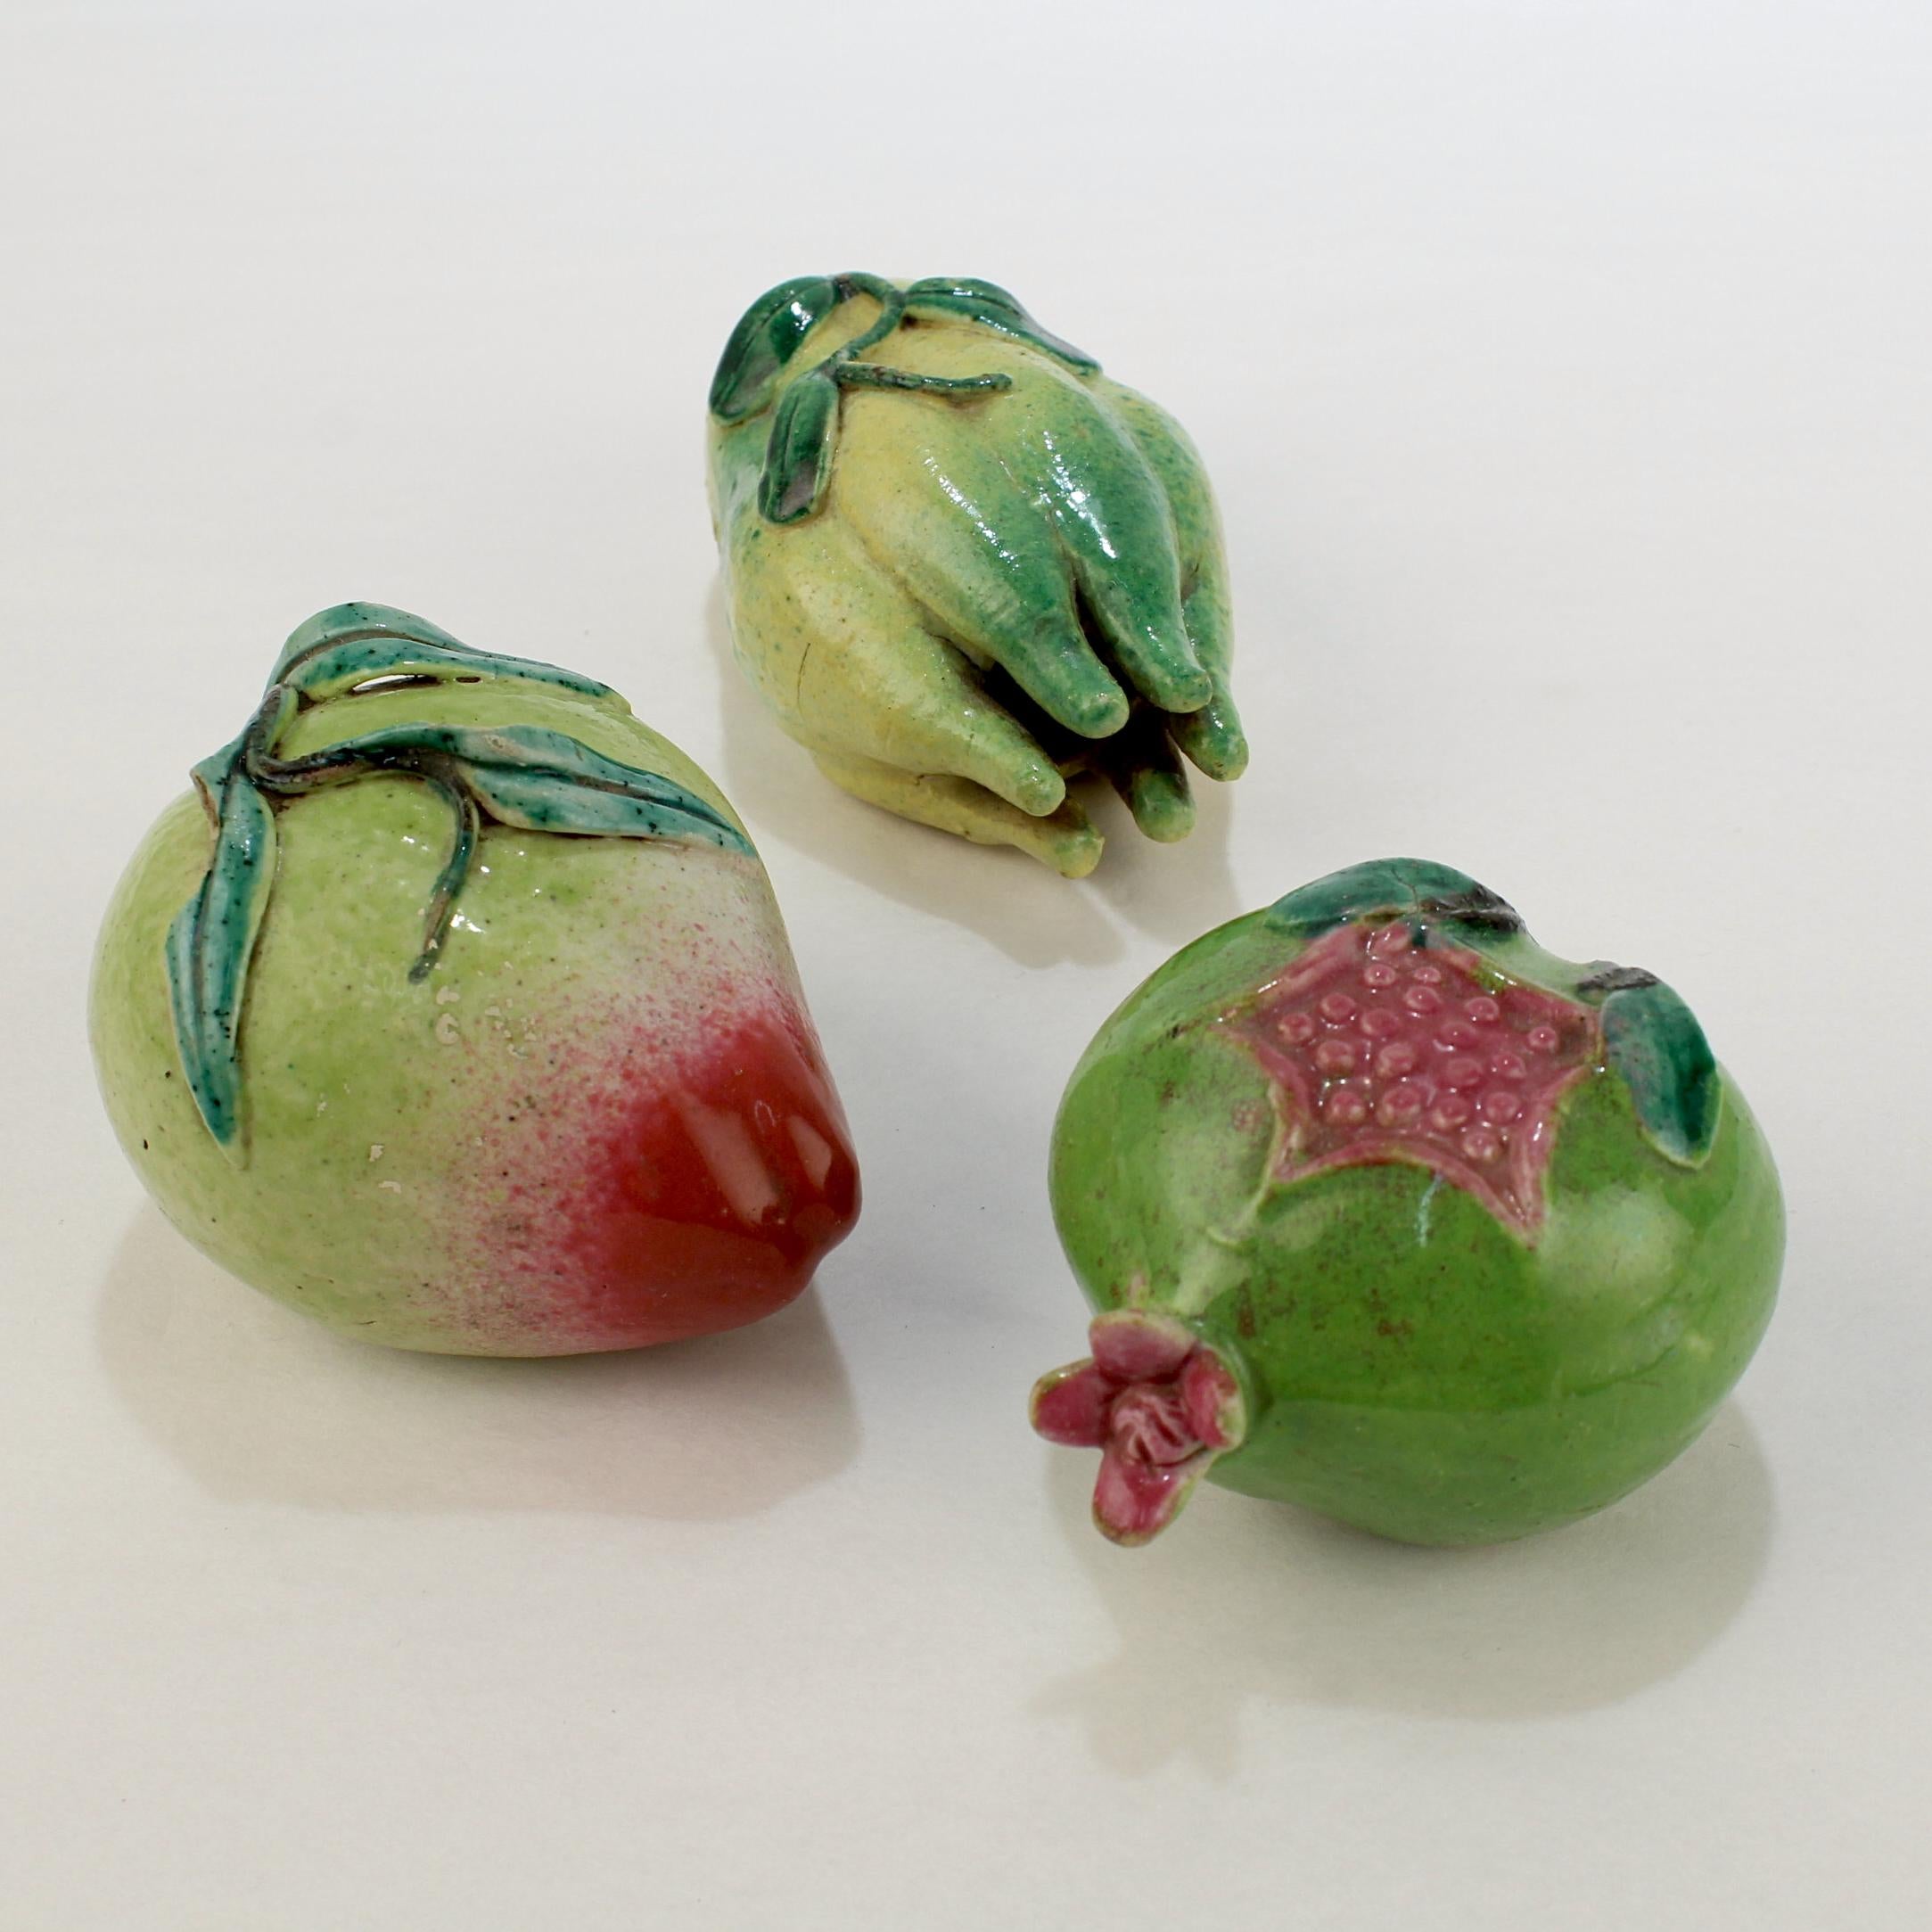 3 pieces of Chinese export porcelain.

Modeled as various altar fruit.

With yellow, green, and dark pink glazes.

A wonderful addition to any collection!

Date:
20th century

Overall condition:
They are in overall good, as-pictured,